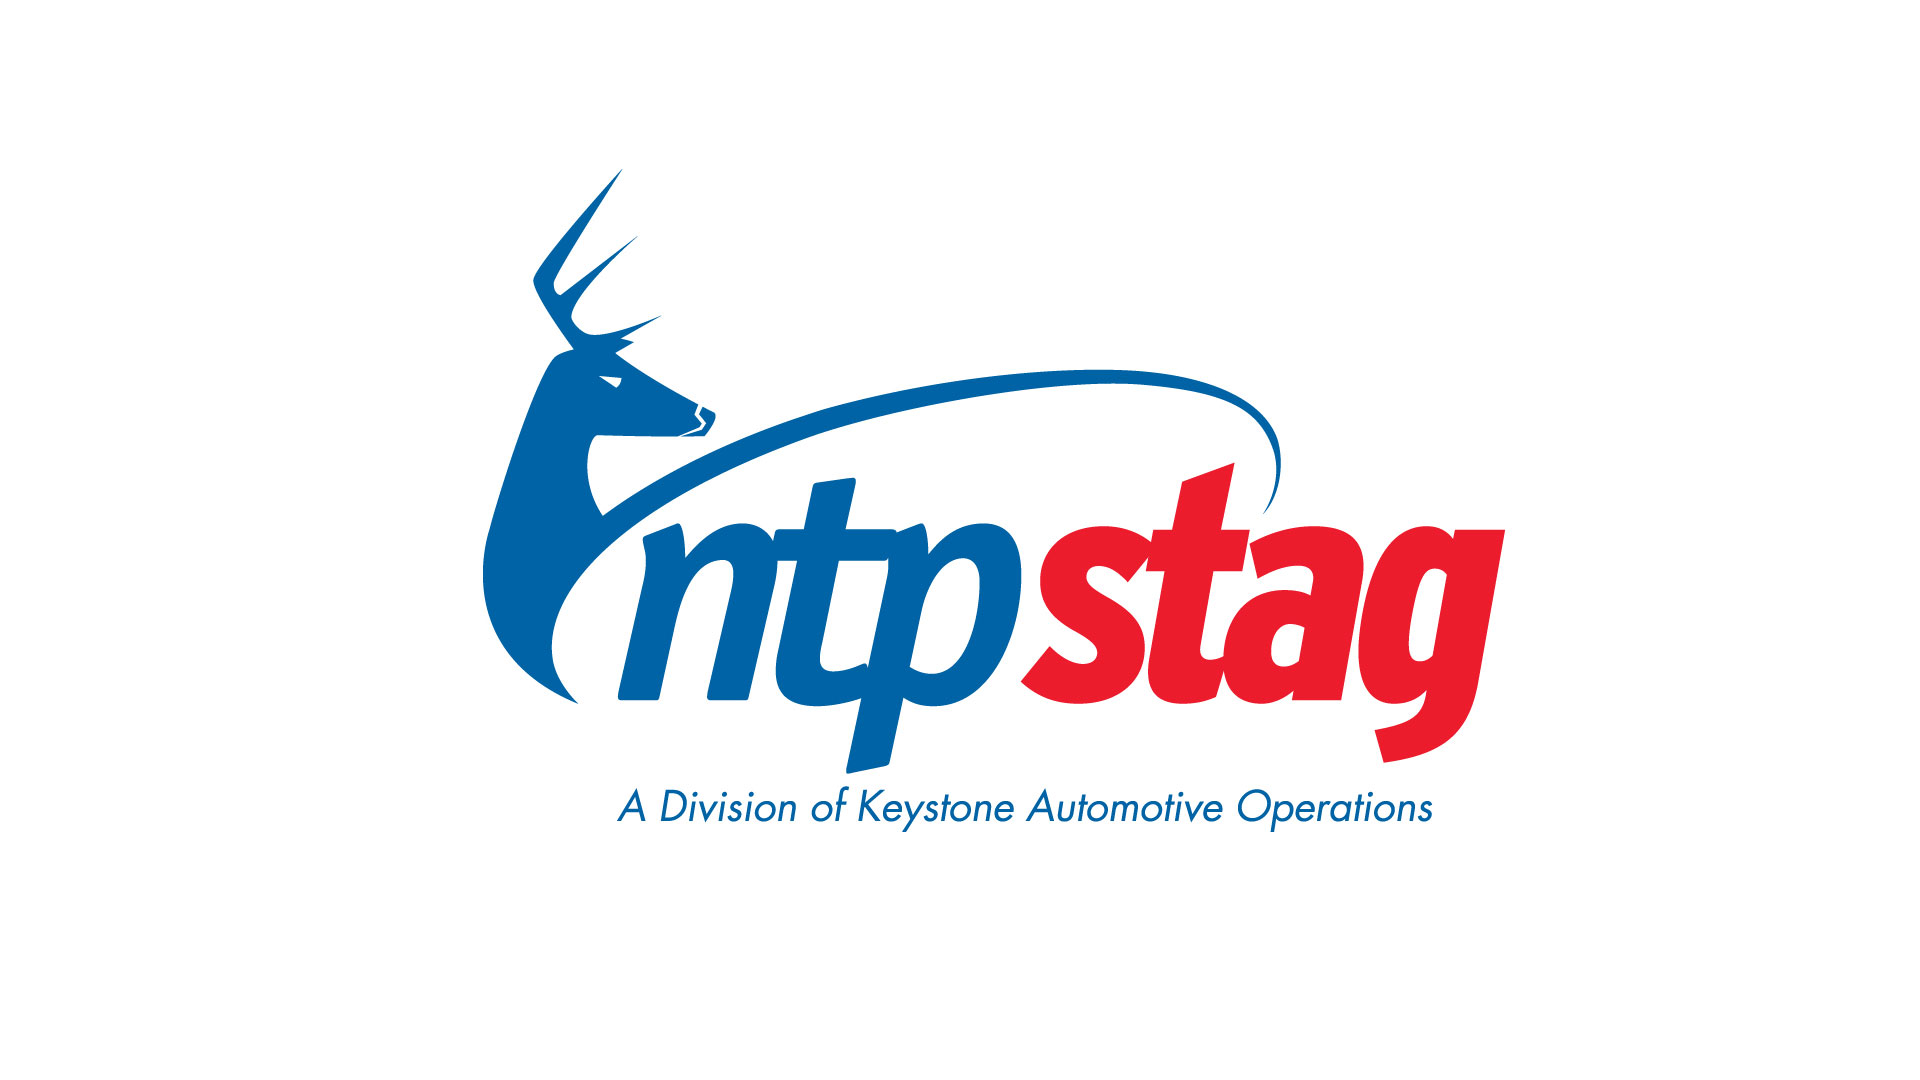 VIDEO: NTP-STAG Welcomes dealers to the 2018 EXPO - RV Dealer News